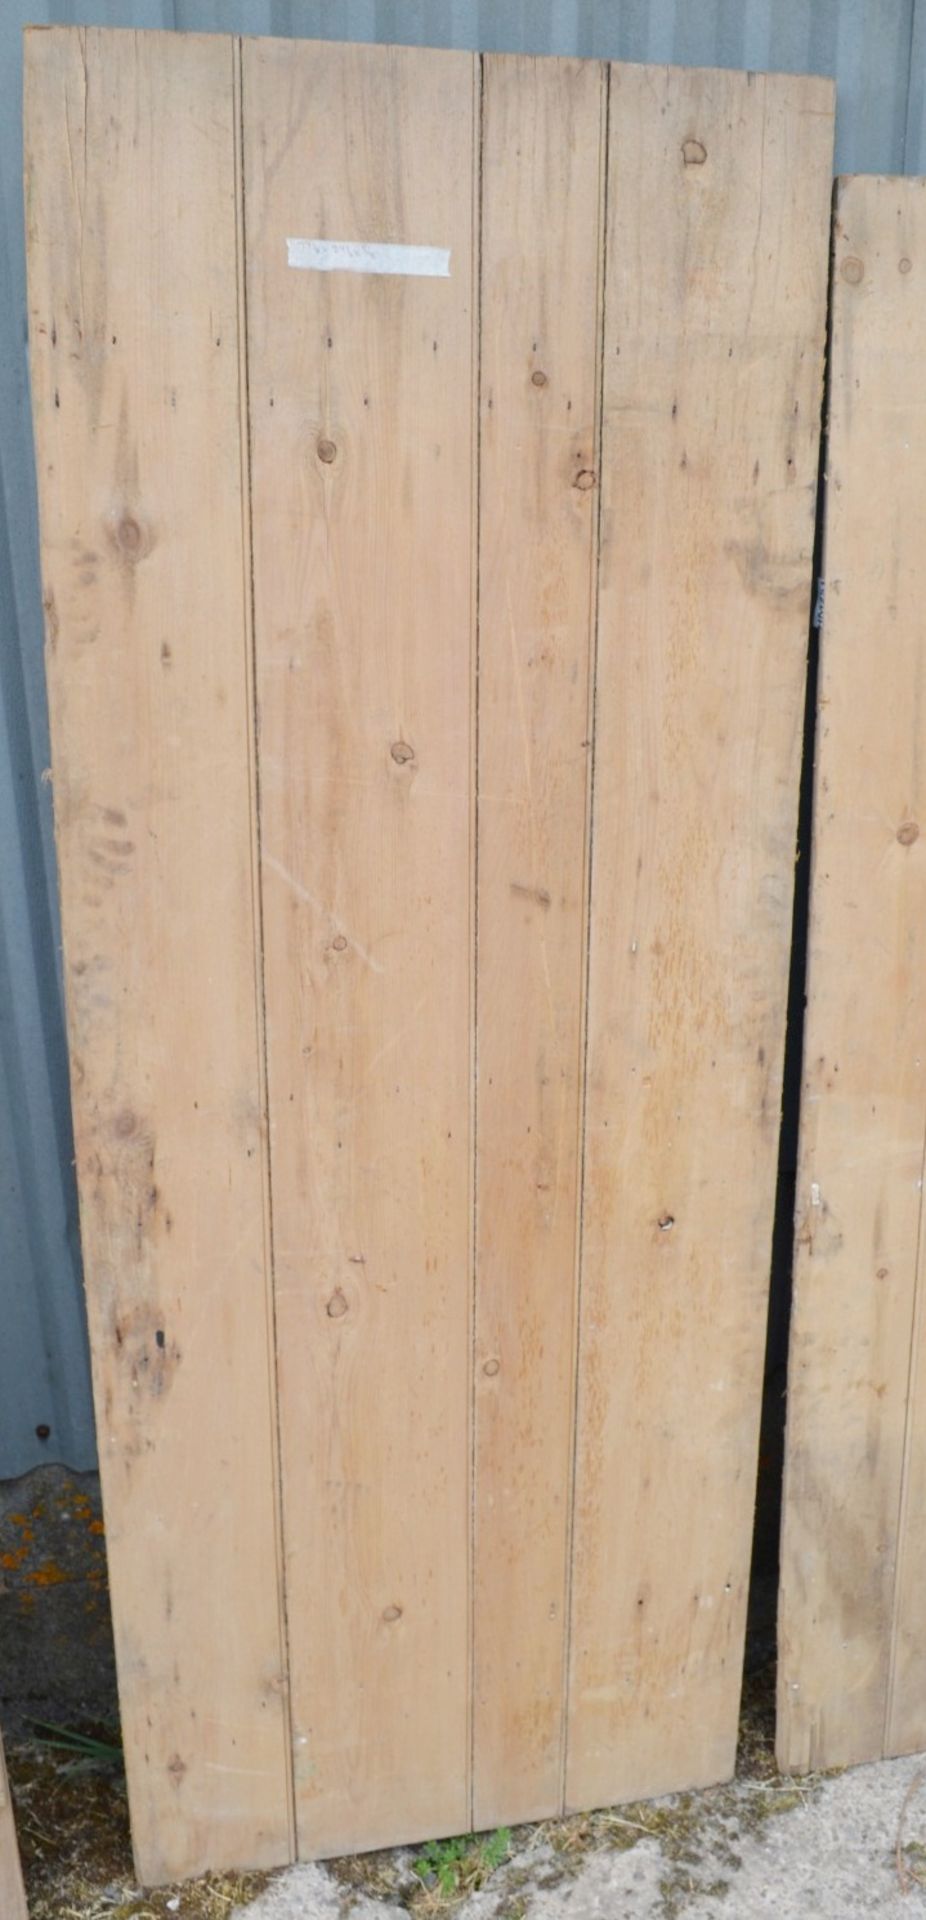 Set Of 4 x Reclaimed Unpainted Wooden Doors - Taken From A Grade II Listed Property - Image 6 of 8